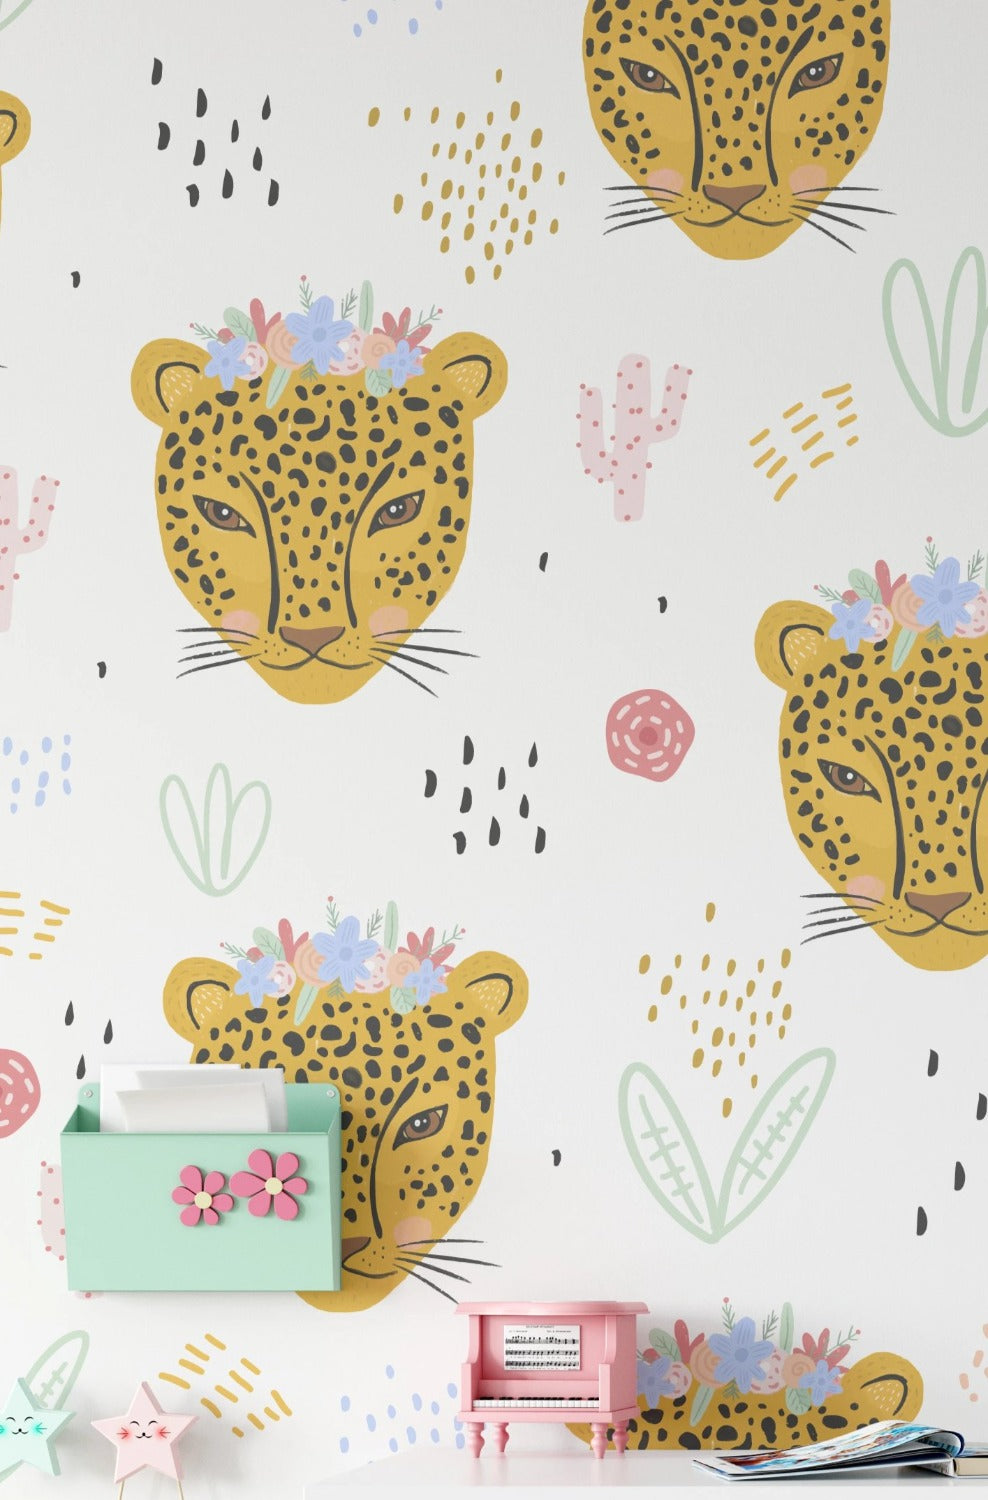 A room decorated with the same children's wallpaper featuring yellow leopard heads with flower crowns. The wallpaper covers the wall behind a white desk with pink and green accessories, creating a lively and cheerful atmosphere.